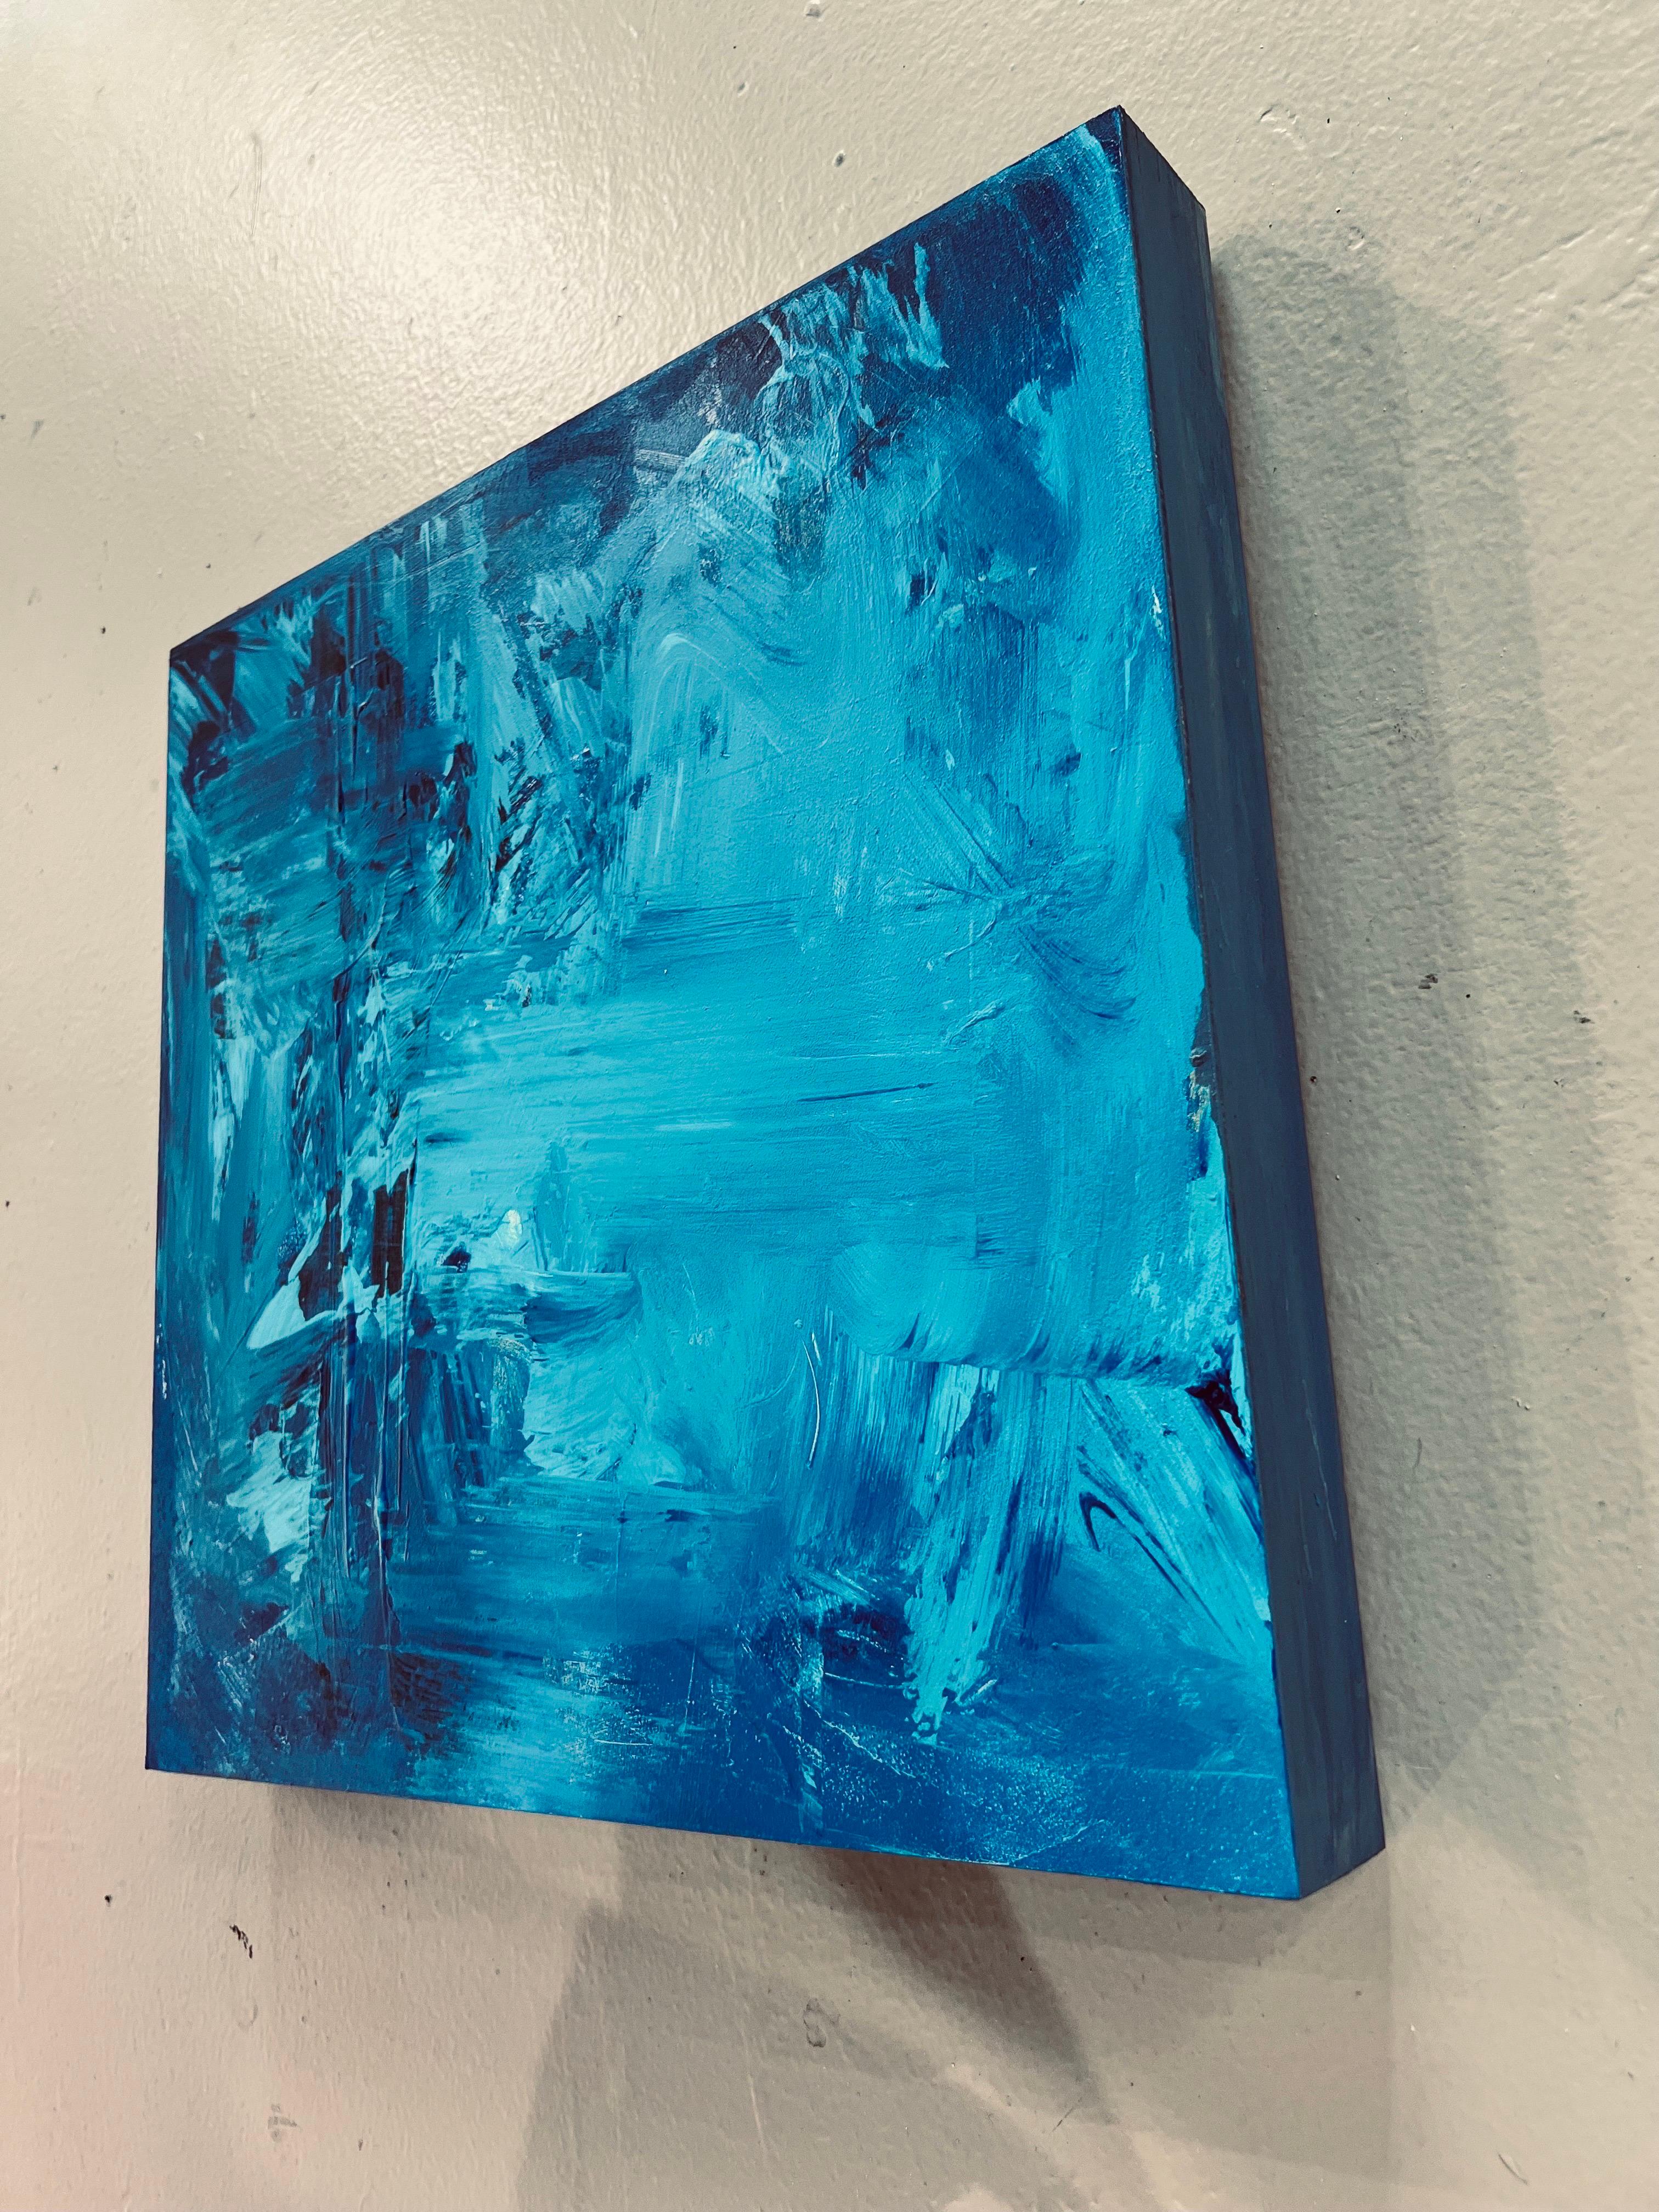 Acrylic Painting on Panel Titled: “Blue Hues I” For Sale 1